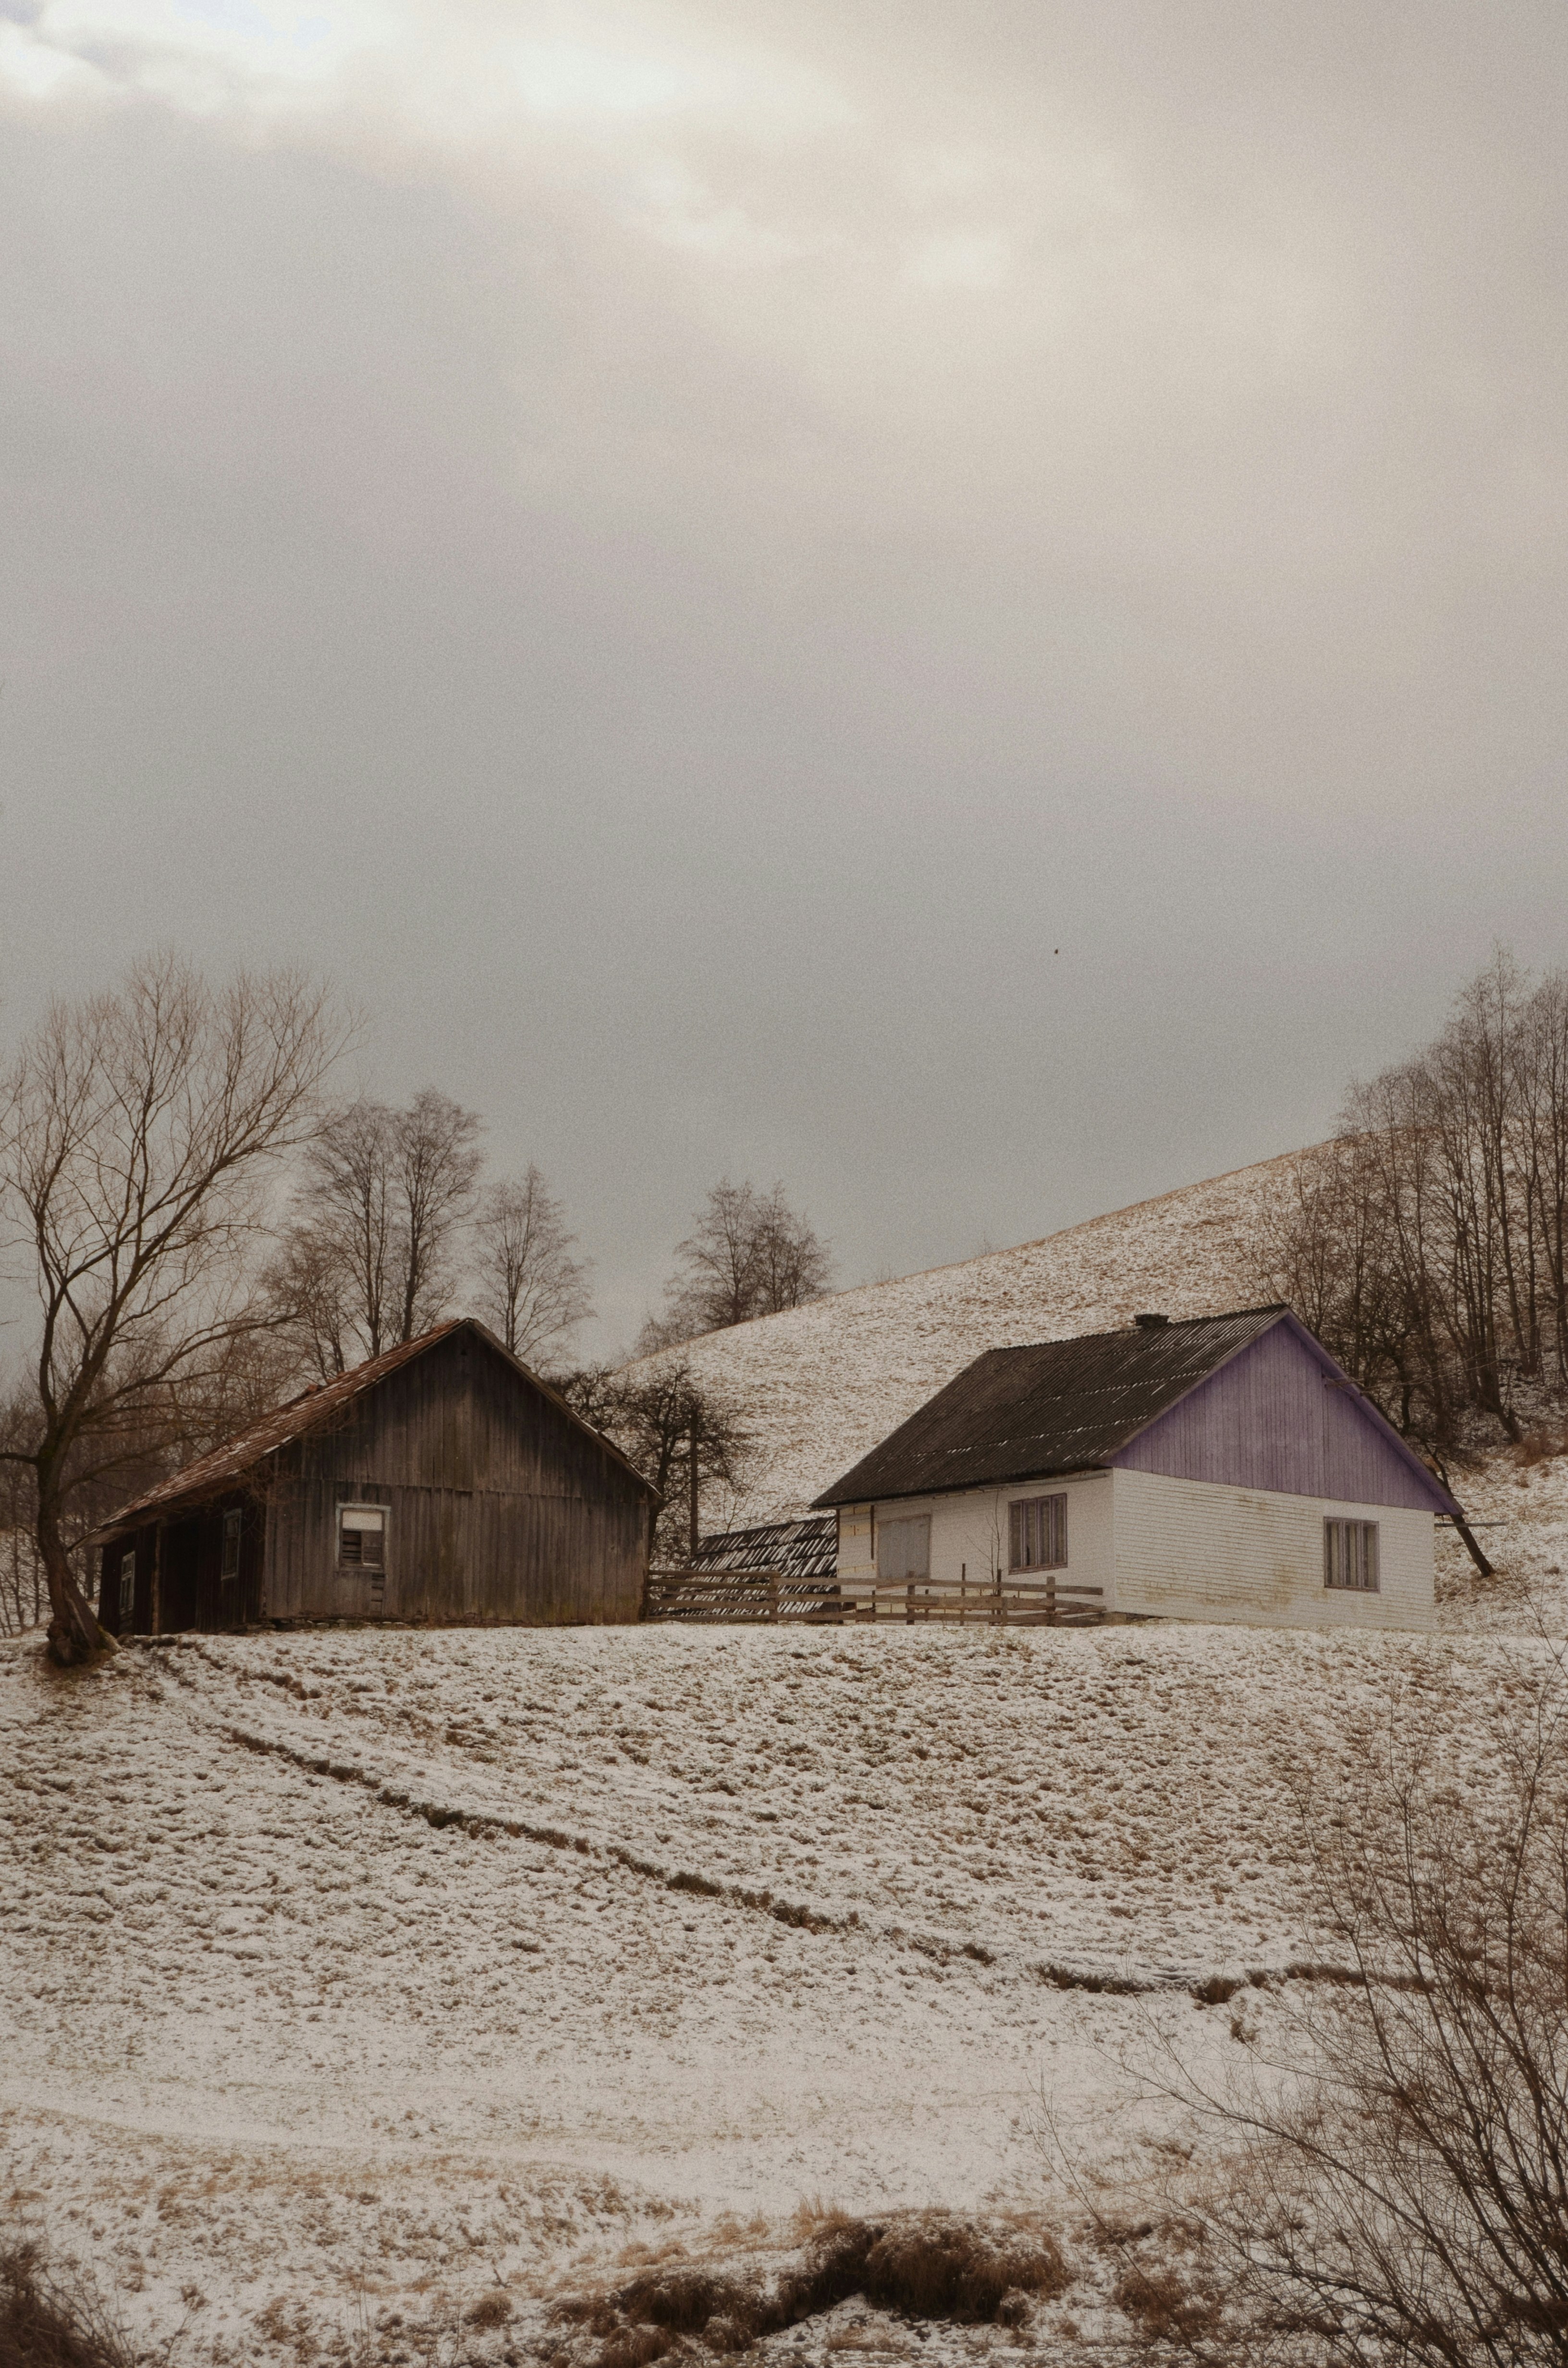 brown wooden house near bare trees under gray sky